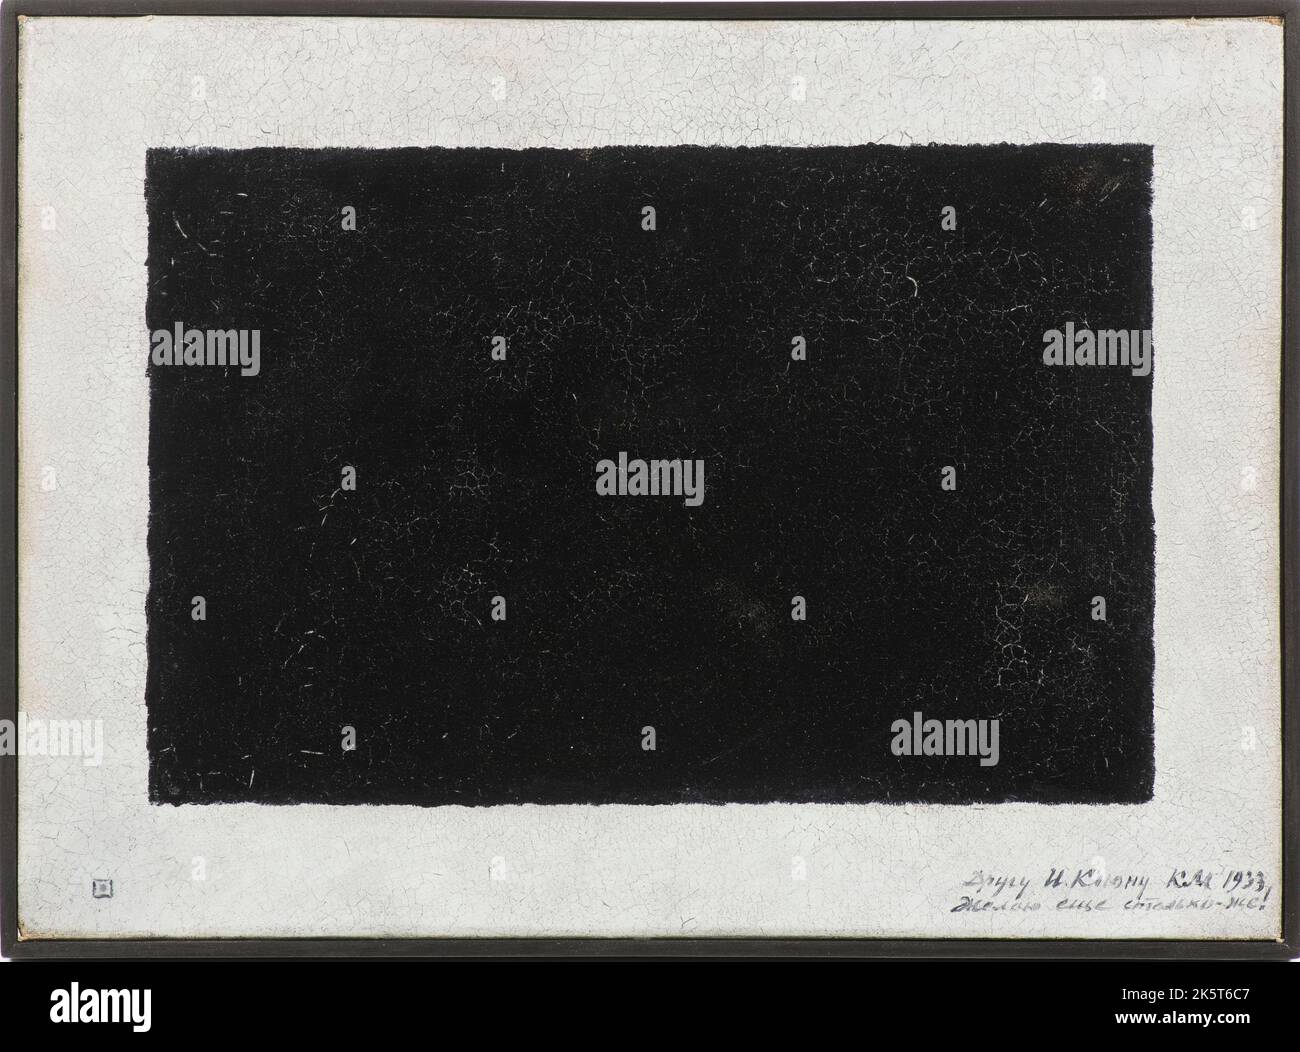 Black Rectangle On White Background, 1933. Private Collection. Stock Photo